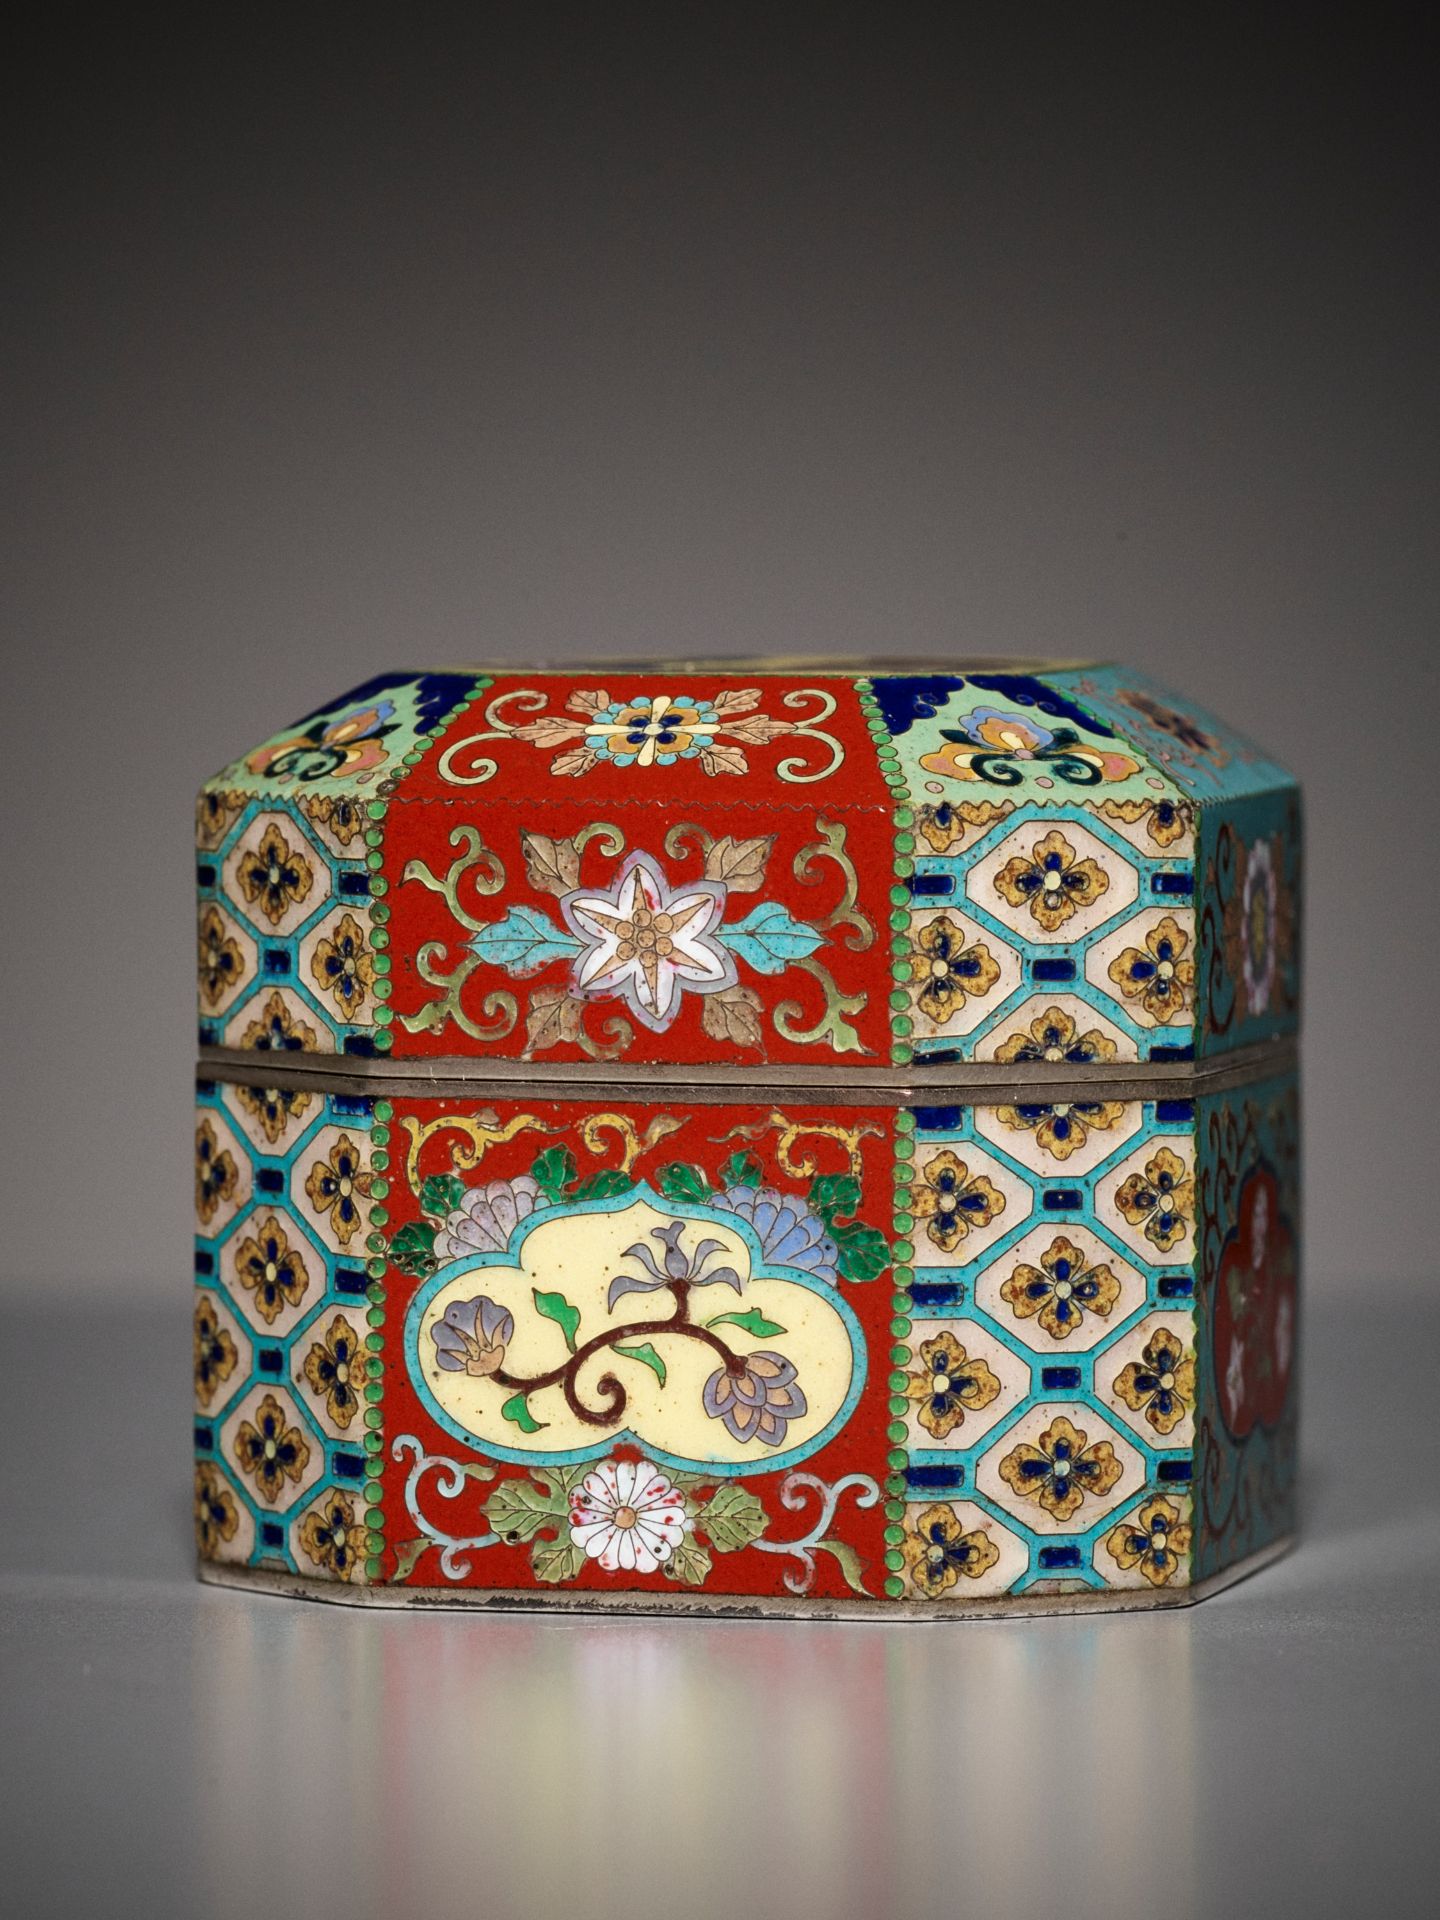 A SUPERB MINIATURE CLOISONNE ENAMEL BOX AND COVER - Image 14 of 16